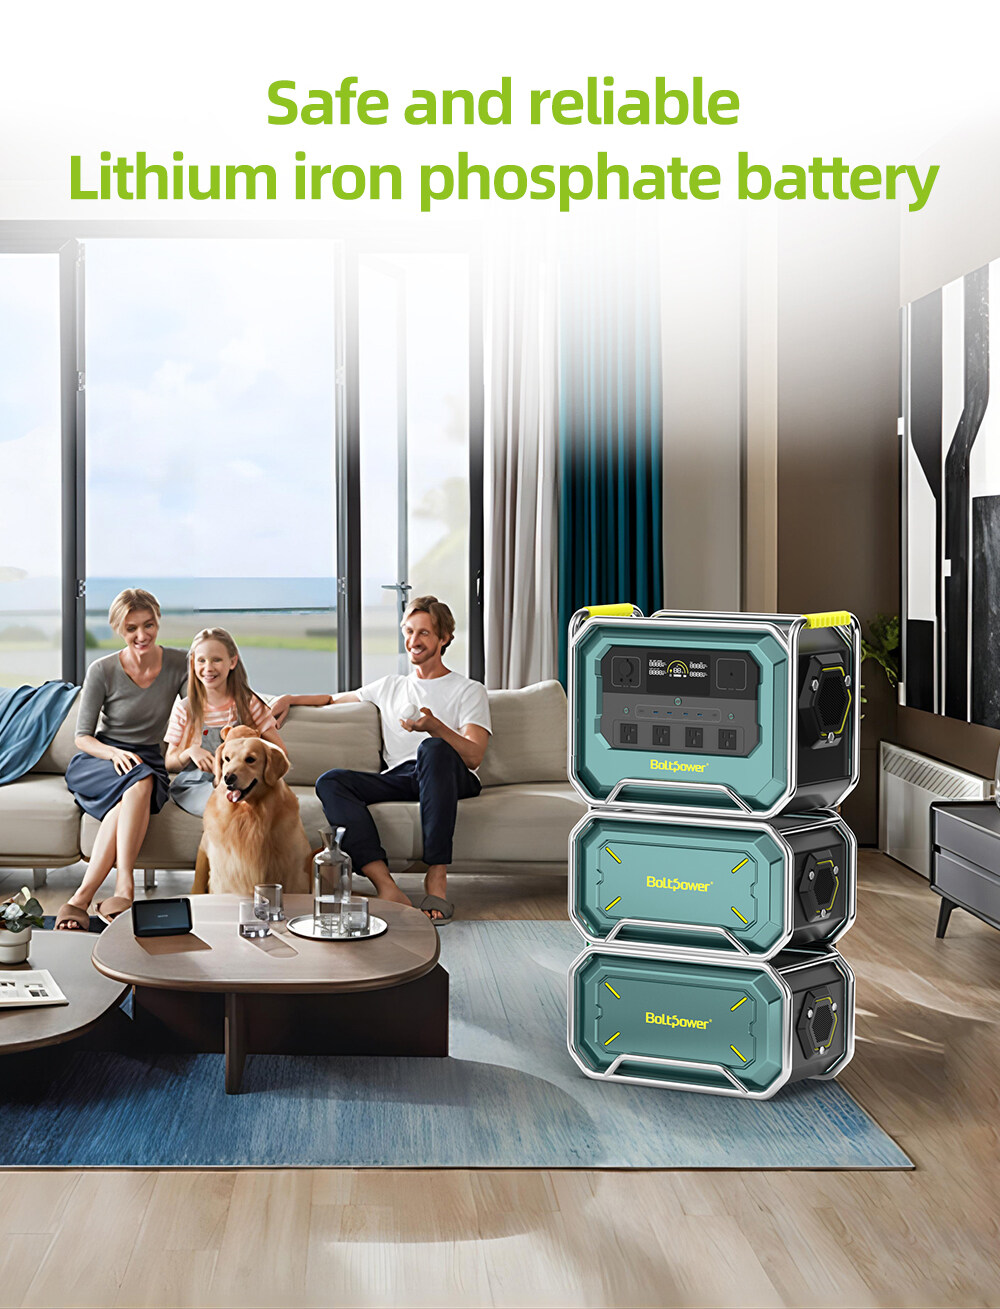 Portable Power Station 4200W for Home energy storage